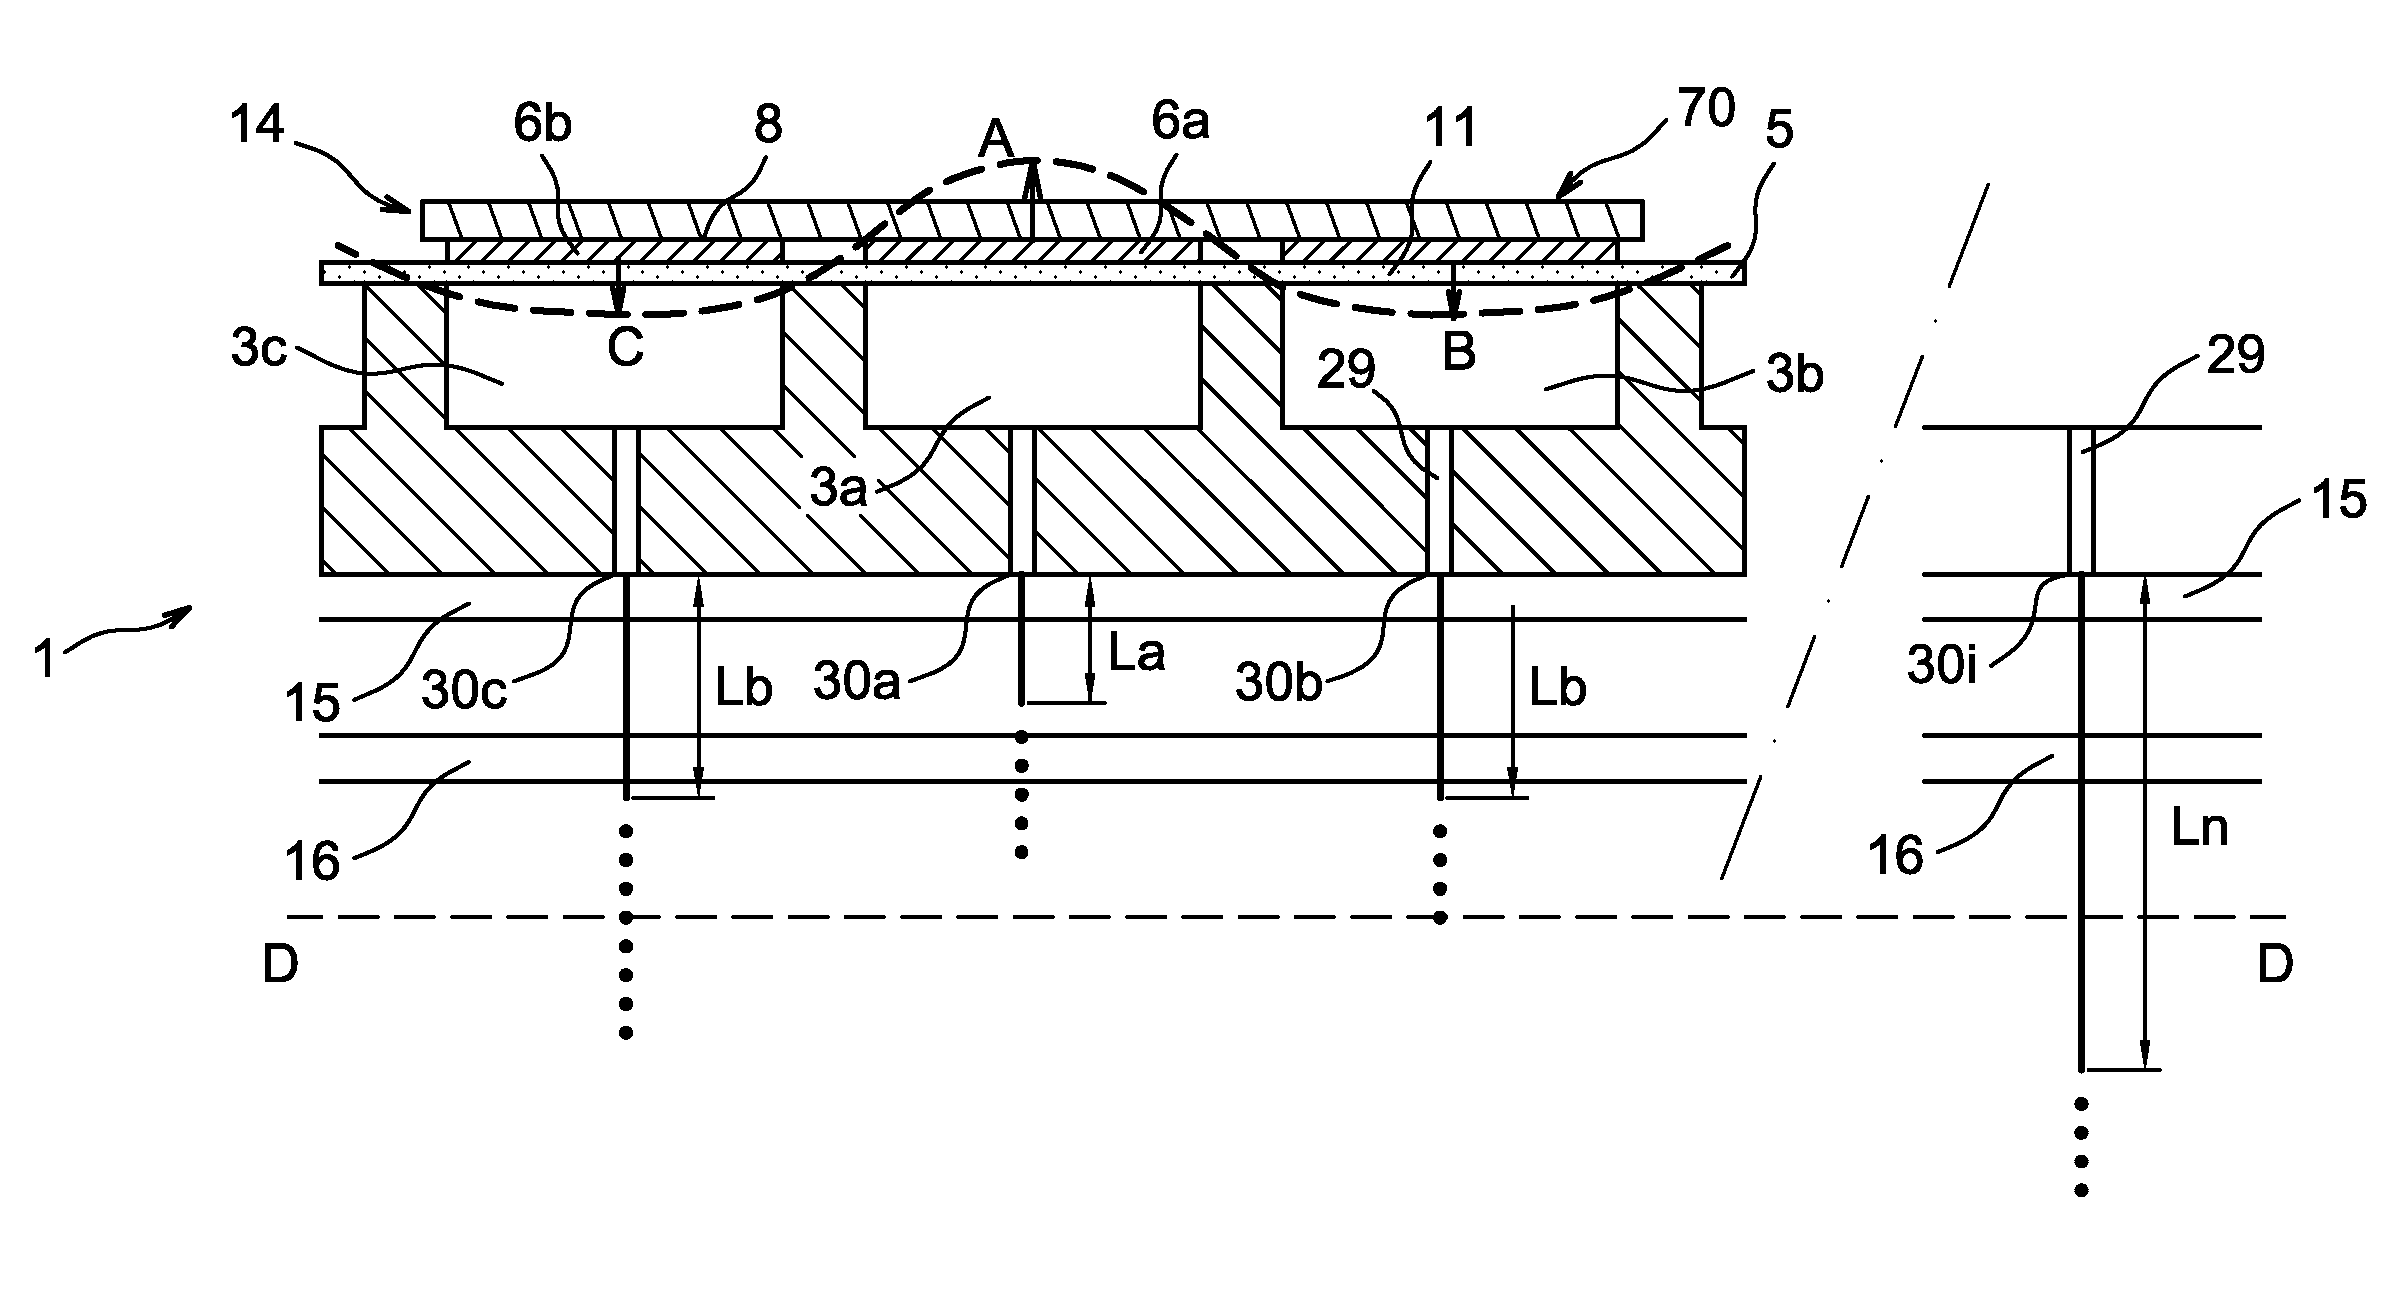 Continuous ink-jet printing device, with improved print quality and autonomy